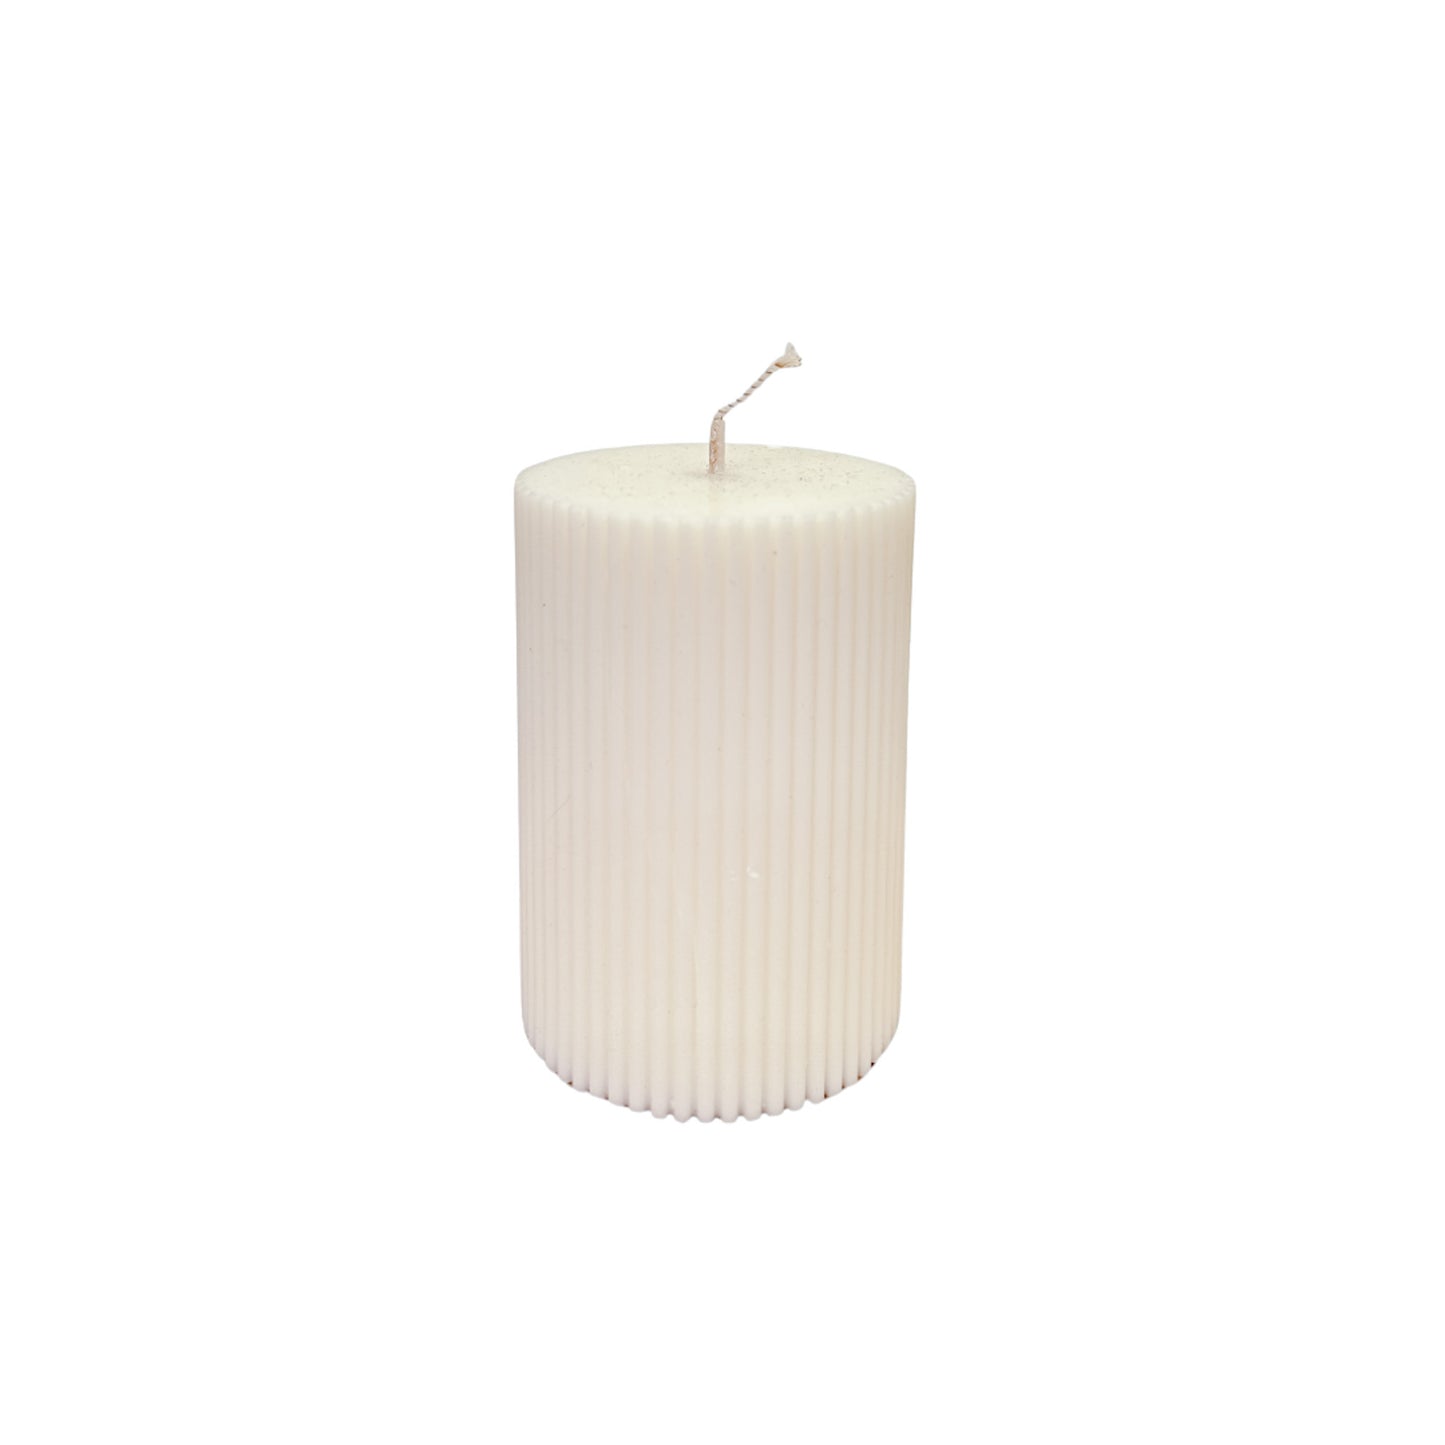 hand poured soy wax ribbed pillar candles